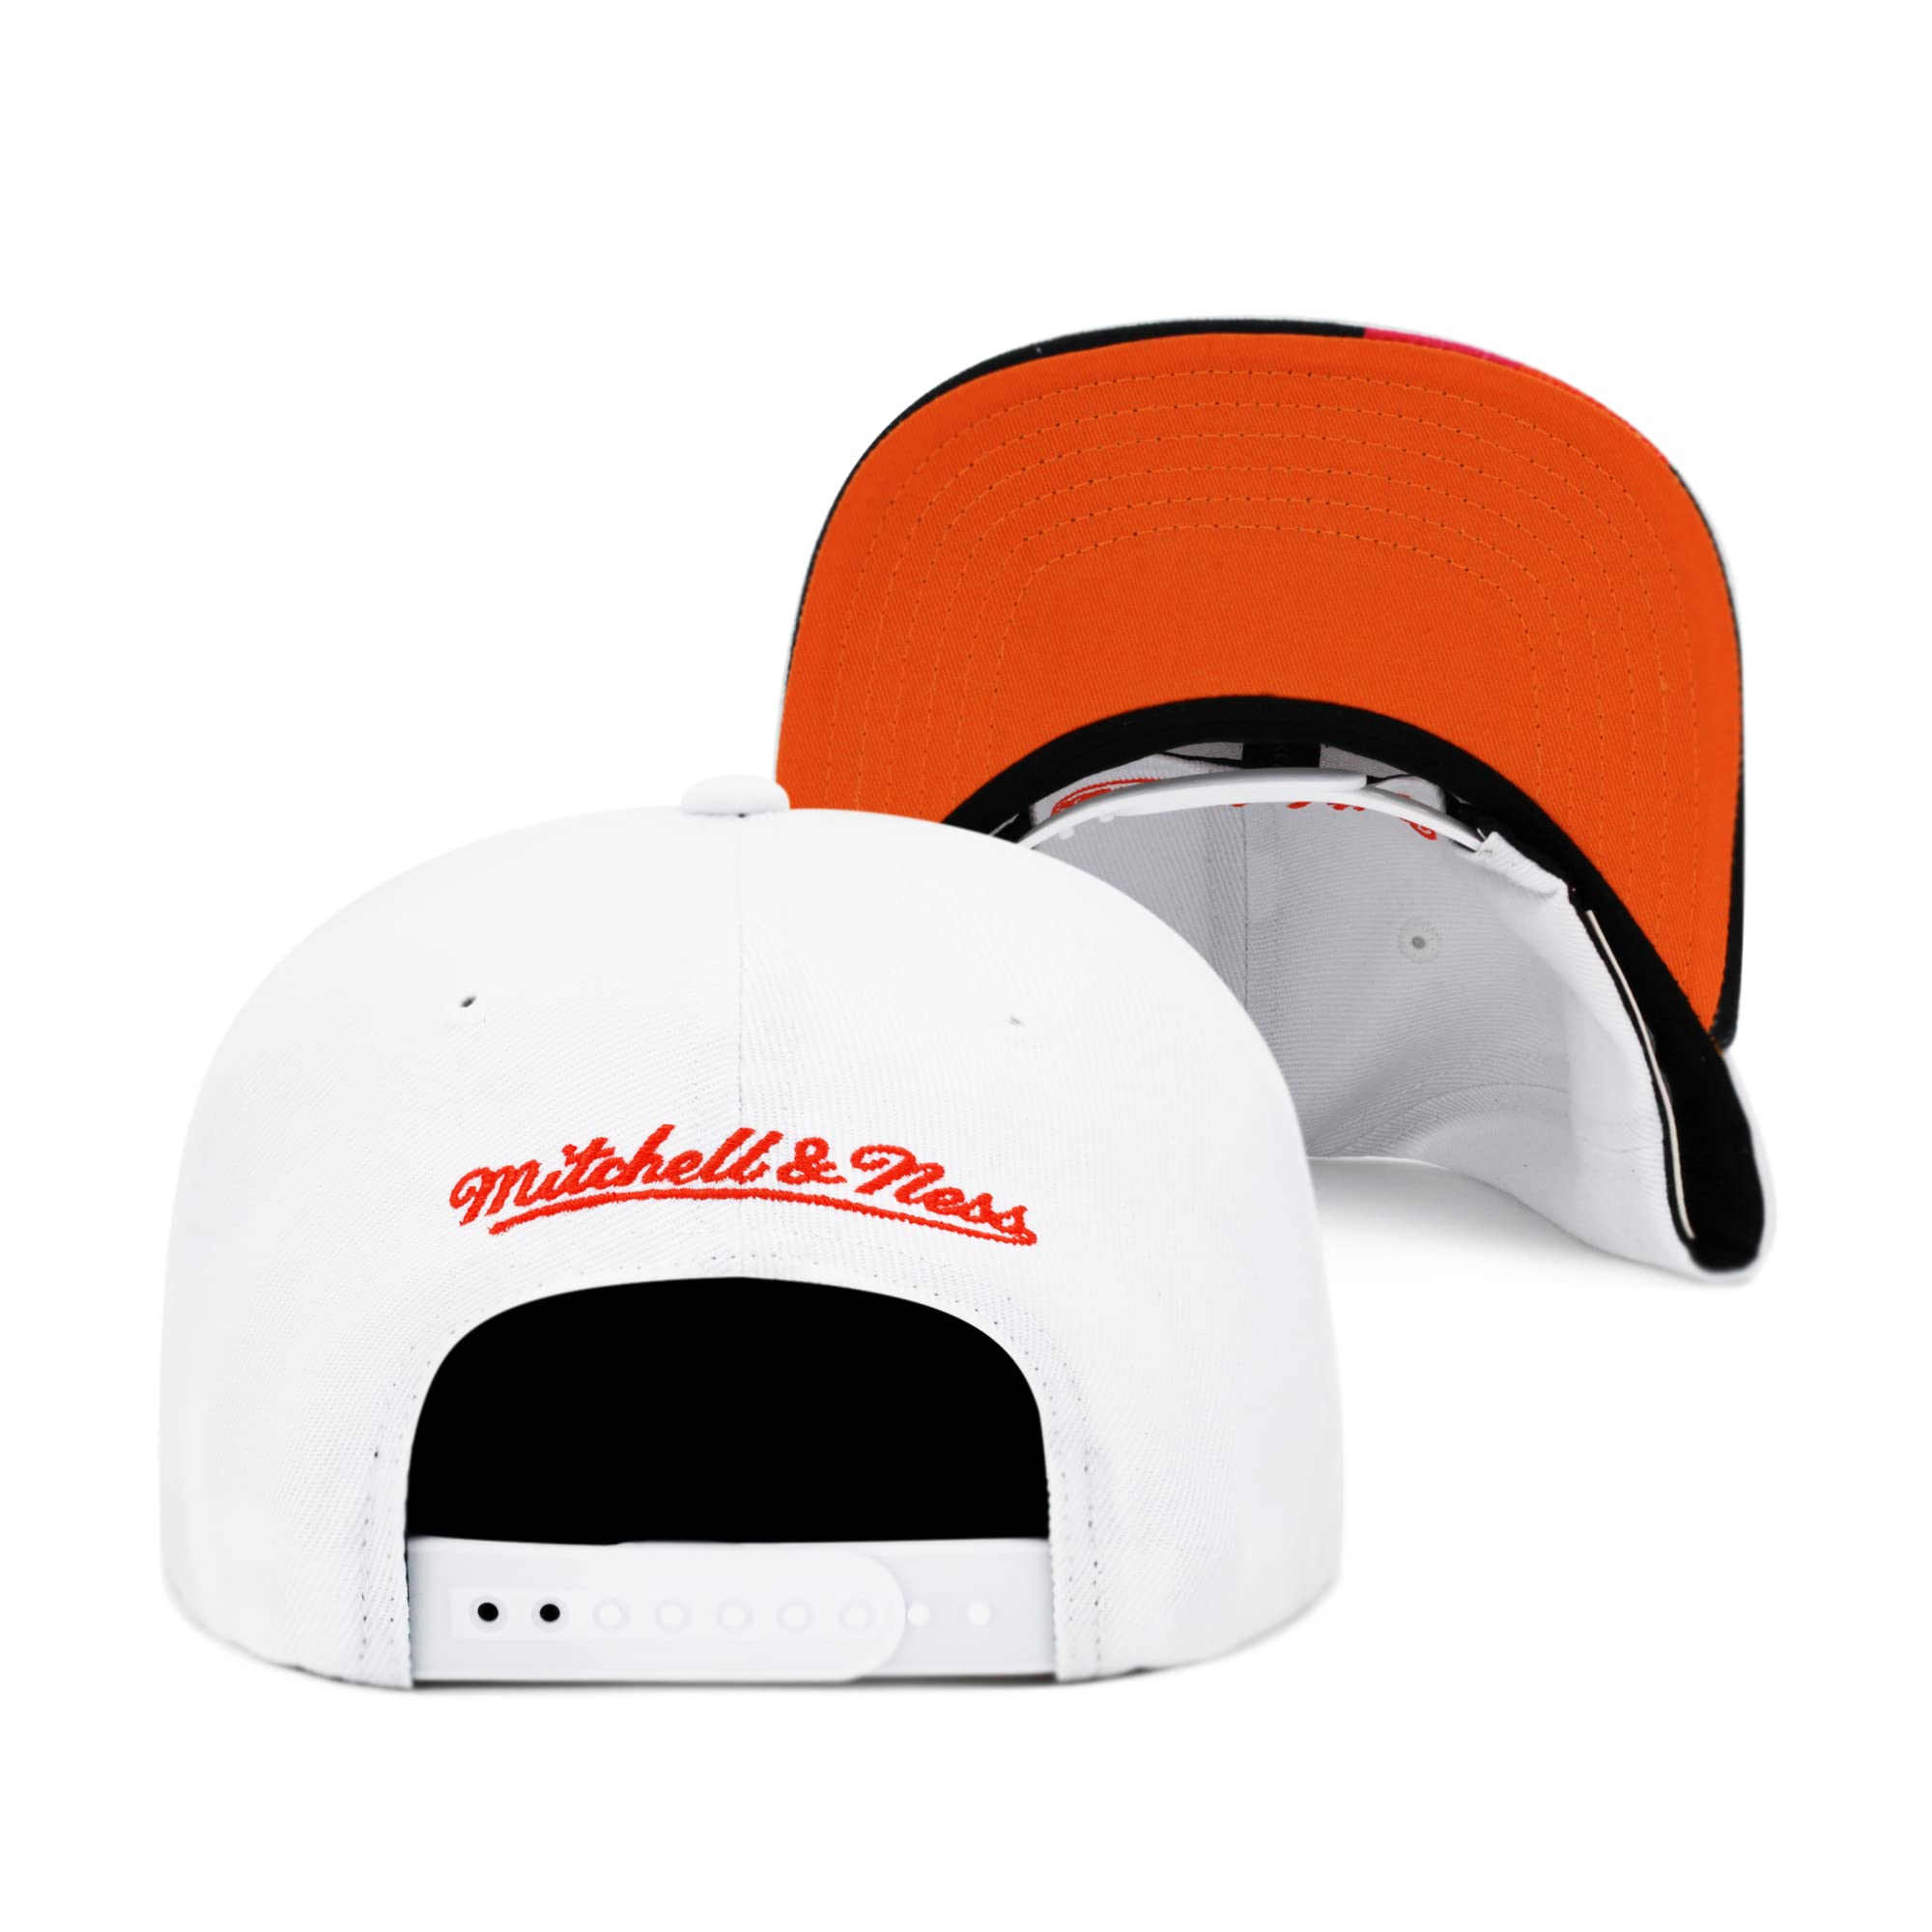 Mitchell & Ness Miami Heat NBA Swingman Pop Snapback Hat Adjustable Cap - White - Caps Fitted Caps Fitted Mitchell & Ness